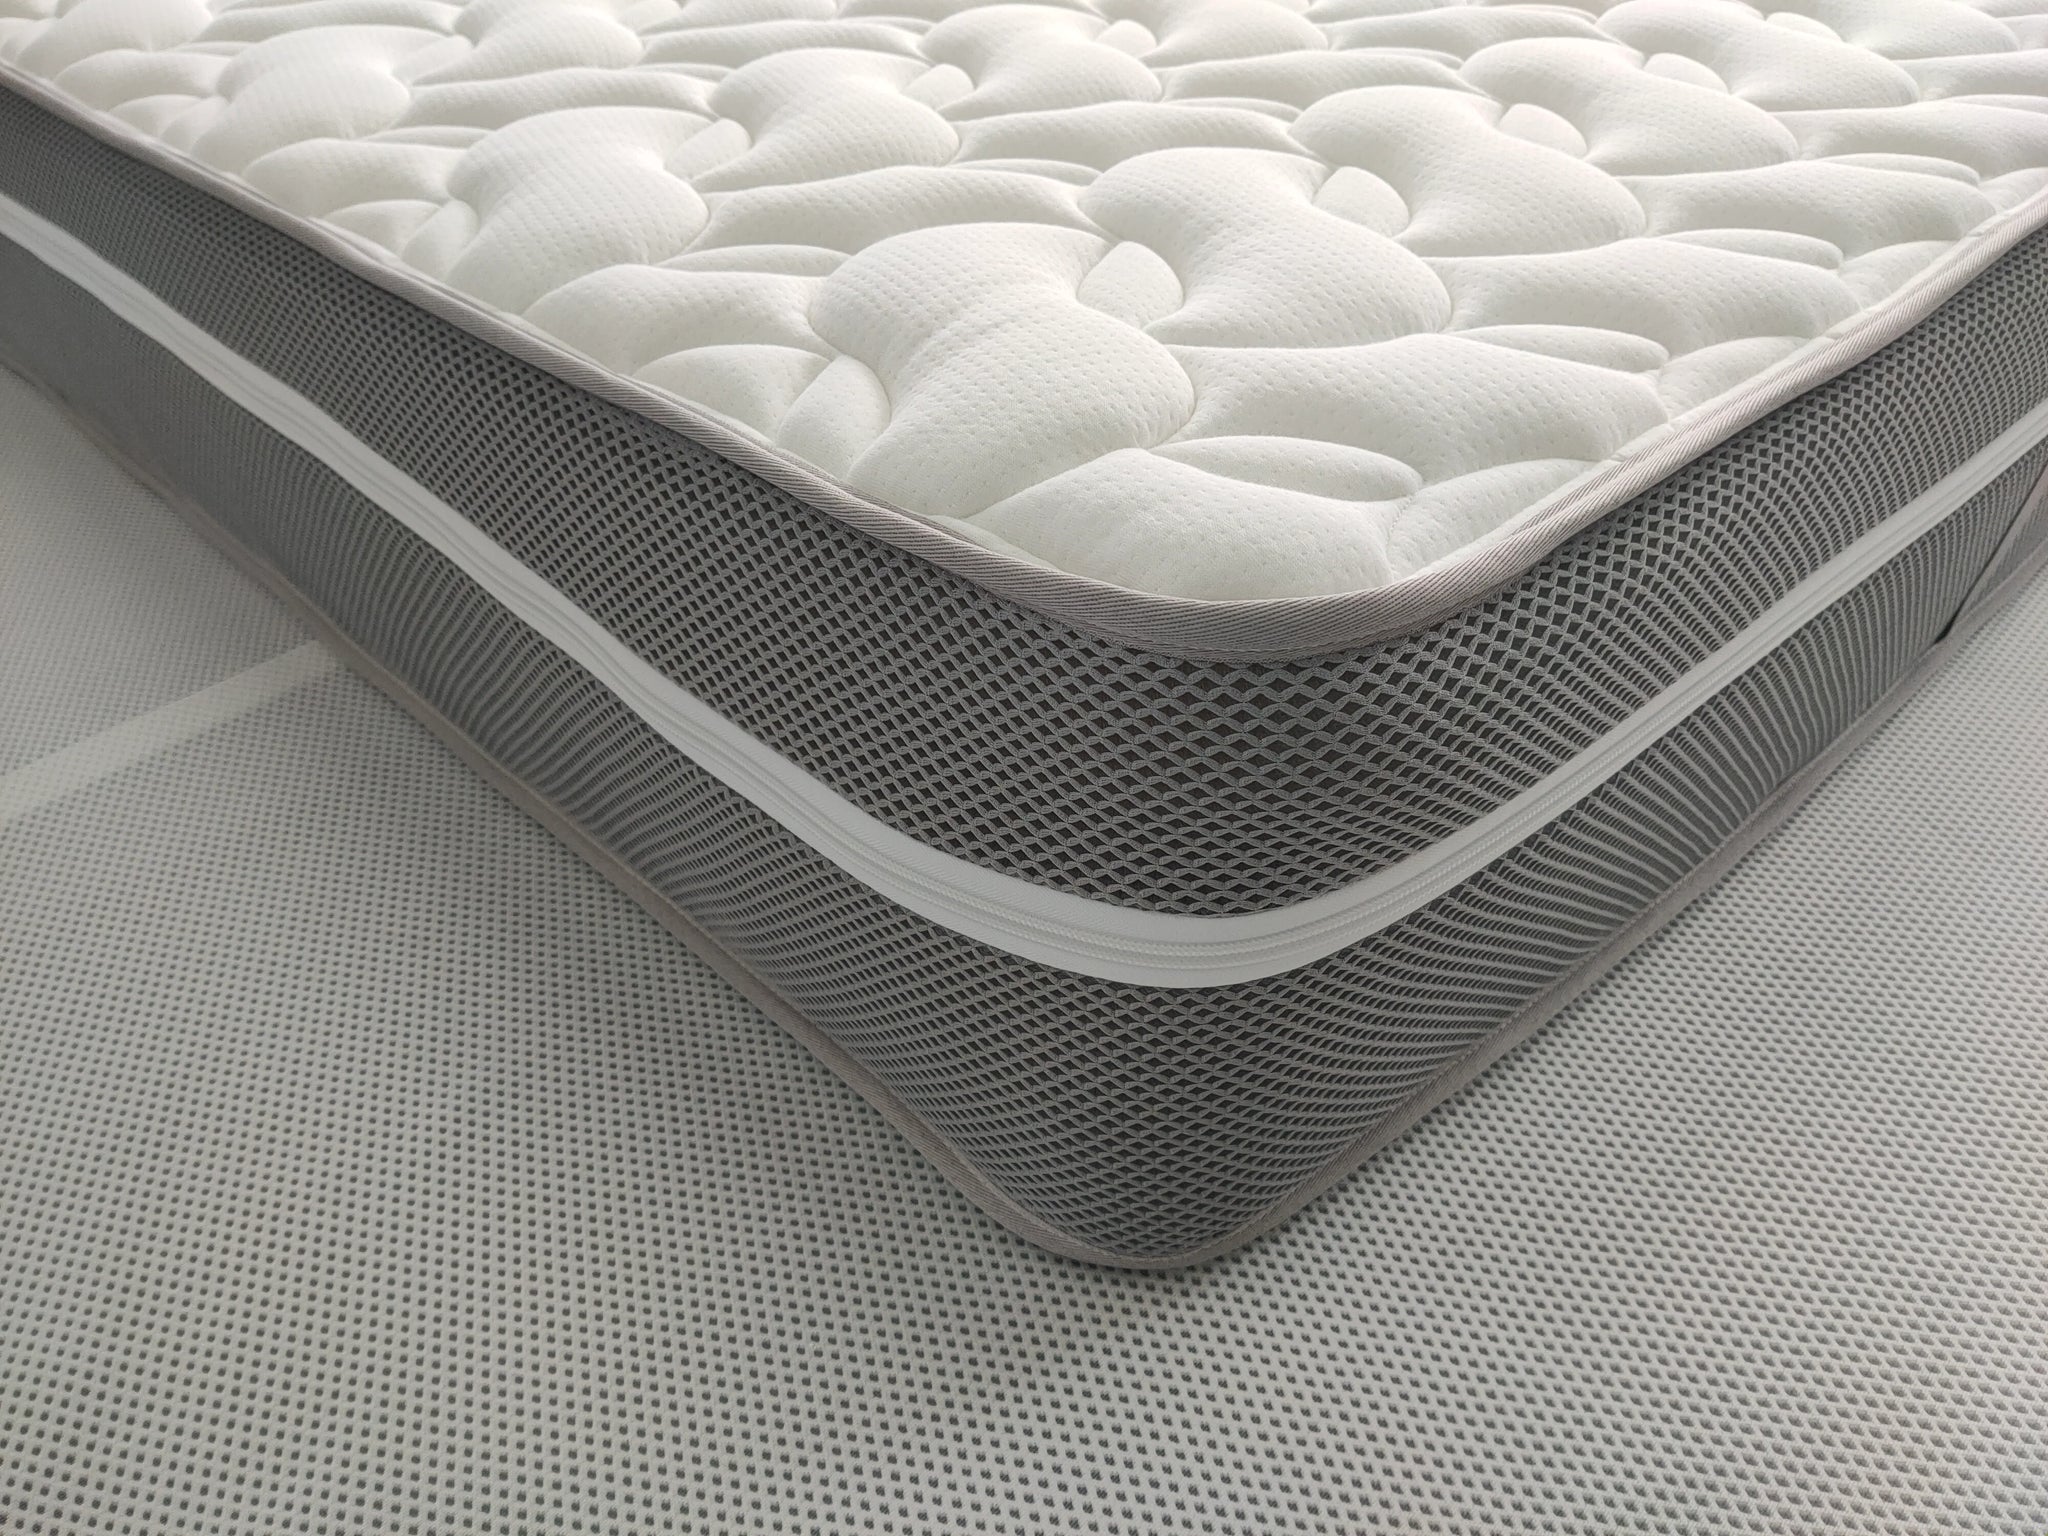 HEAVENLY SLEEP SUPER KING - Pocket Spring Mattress - 365 Night Comfort Swap - Life Time Warranty - Australian Made - Free Delivery* - Melbourne Mattess Factory